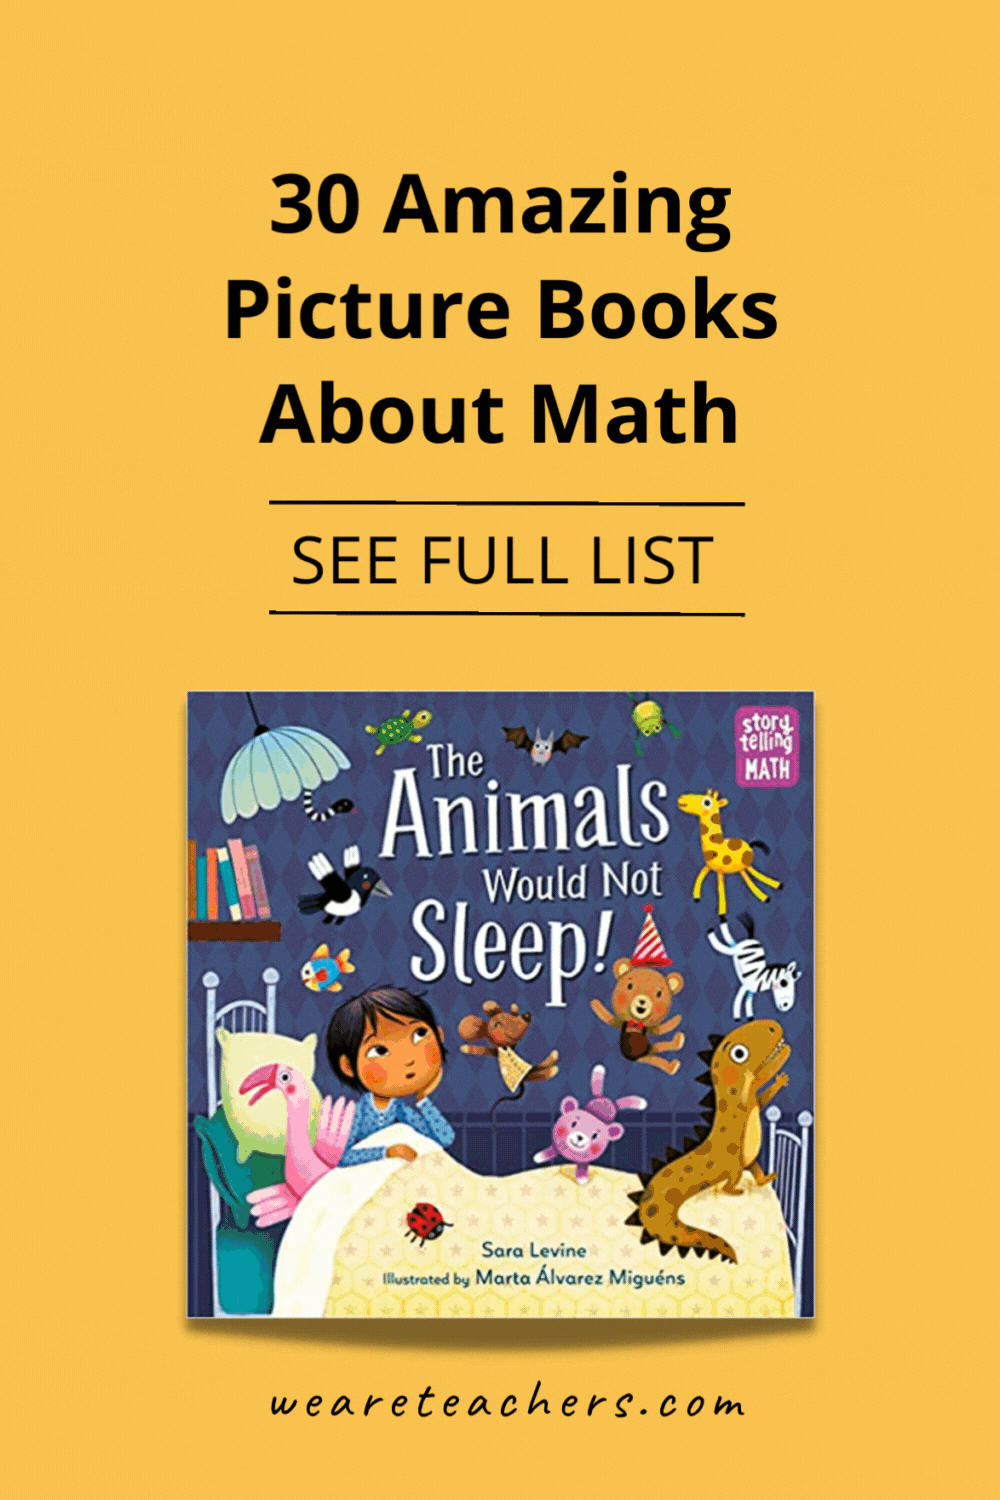 Books about math for kids are the best tool for getting kids excited about math concepts and keeping math conversations going all day long!